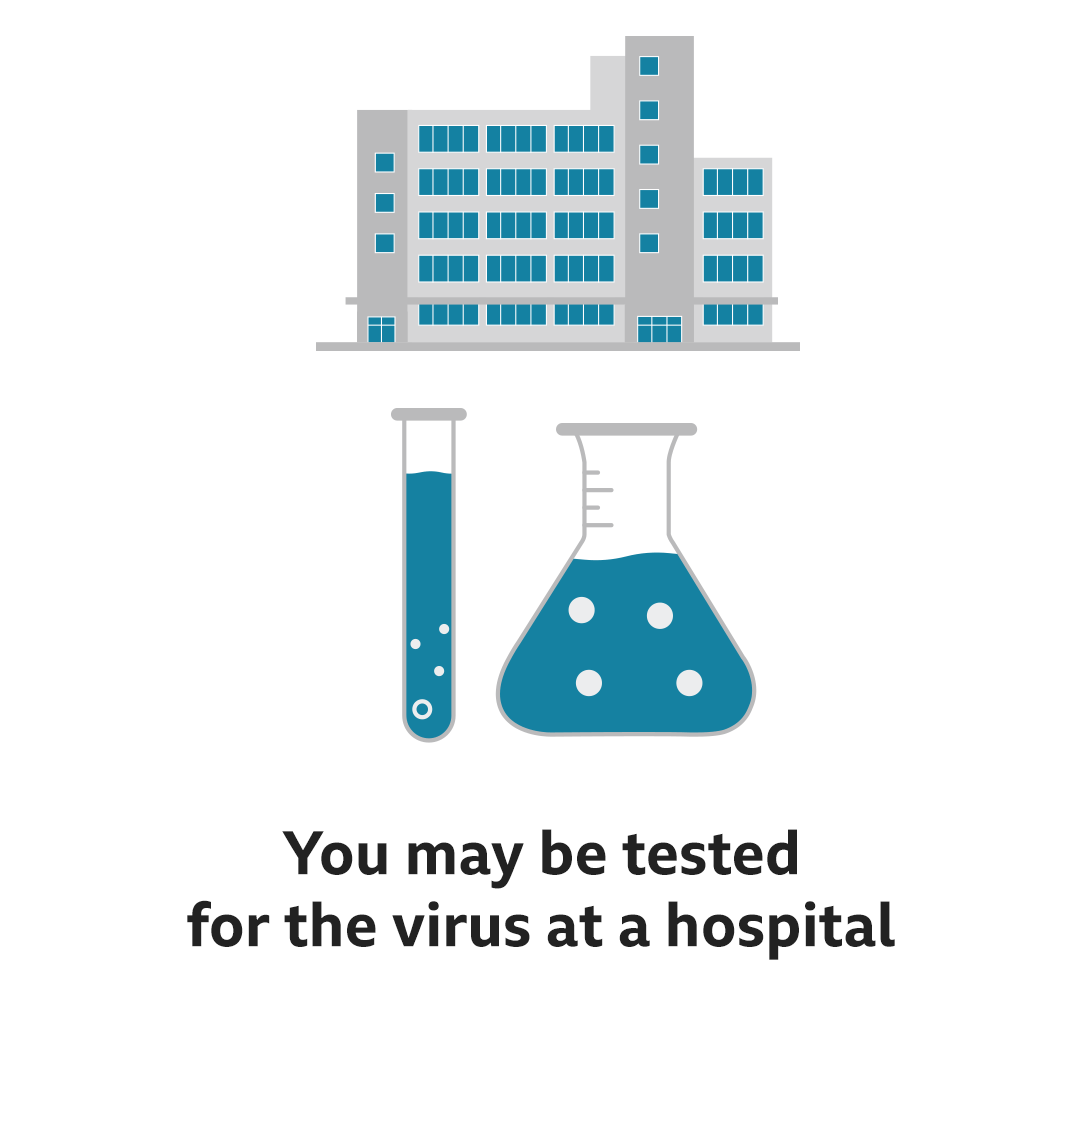 Text reads: You may be tested for the virus at a hospital